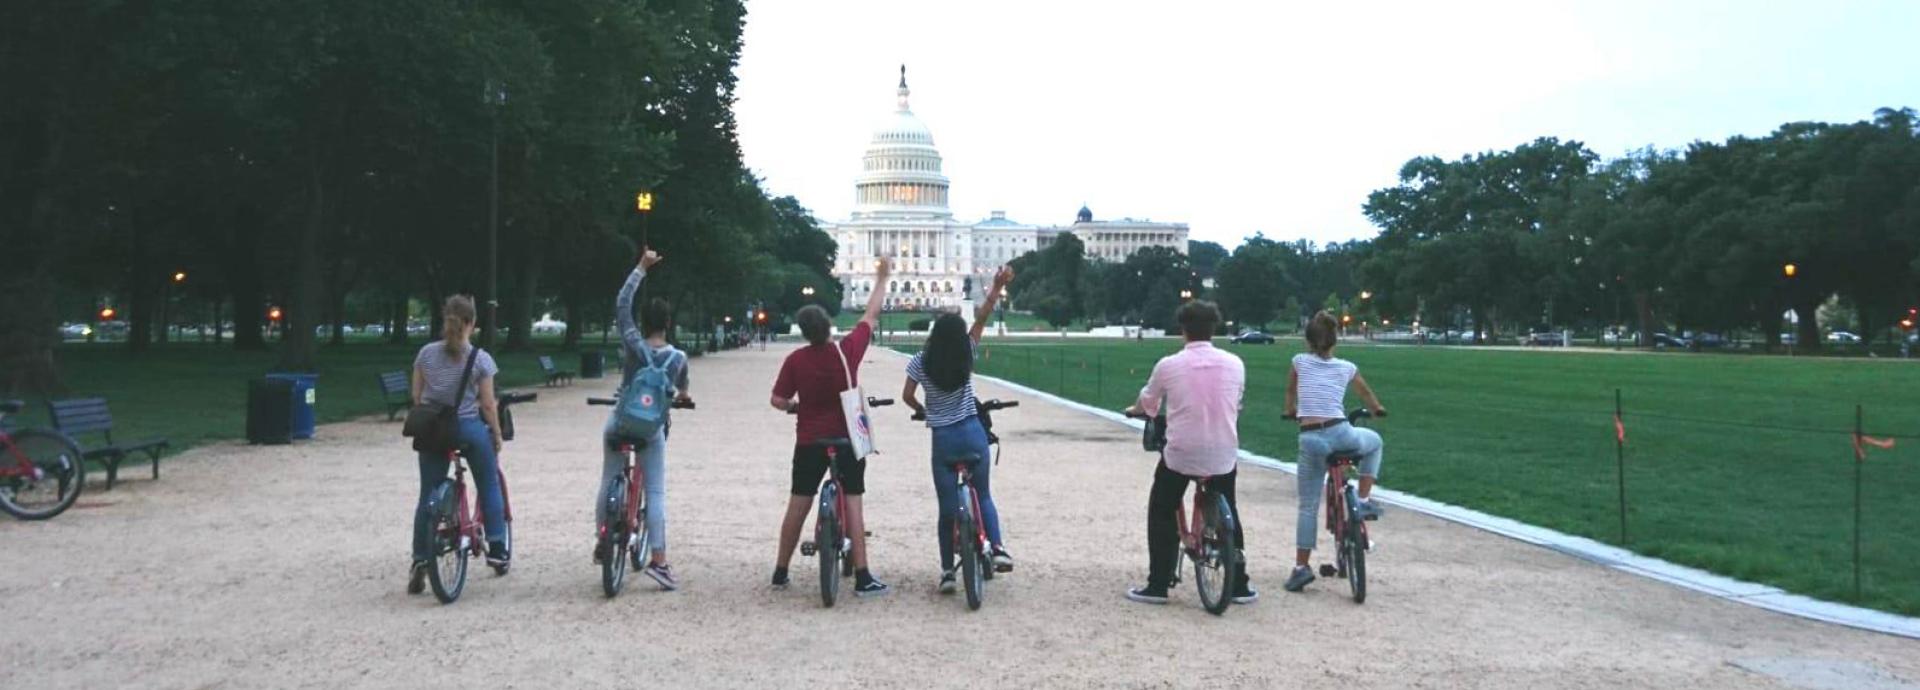 Six people on bikes at the National Mall with the Capitol Building in the background